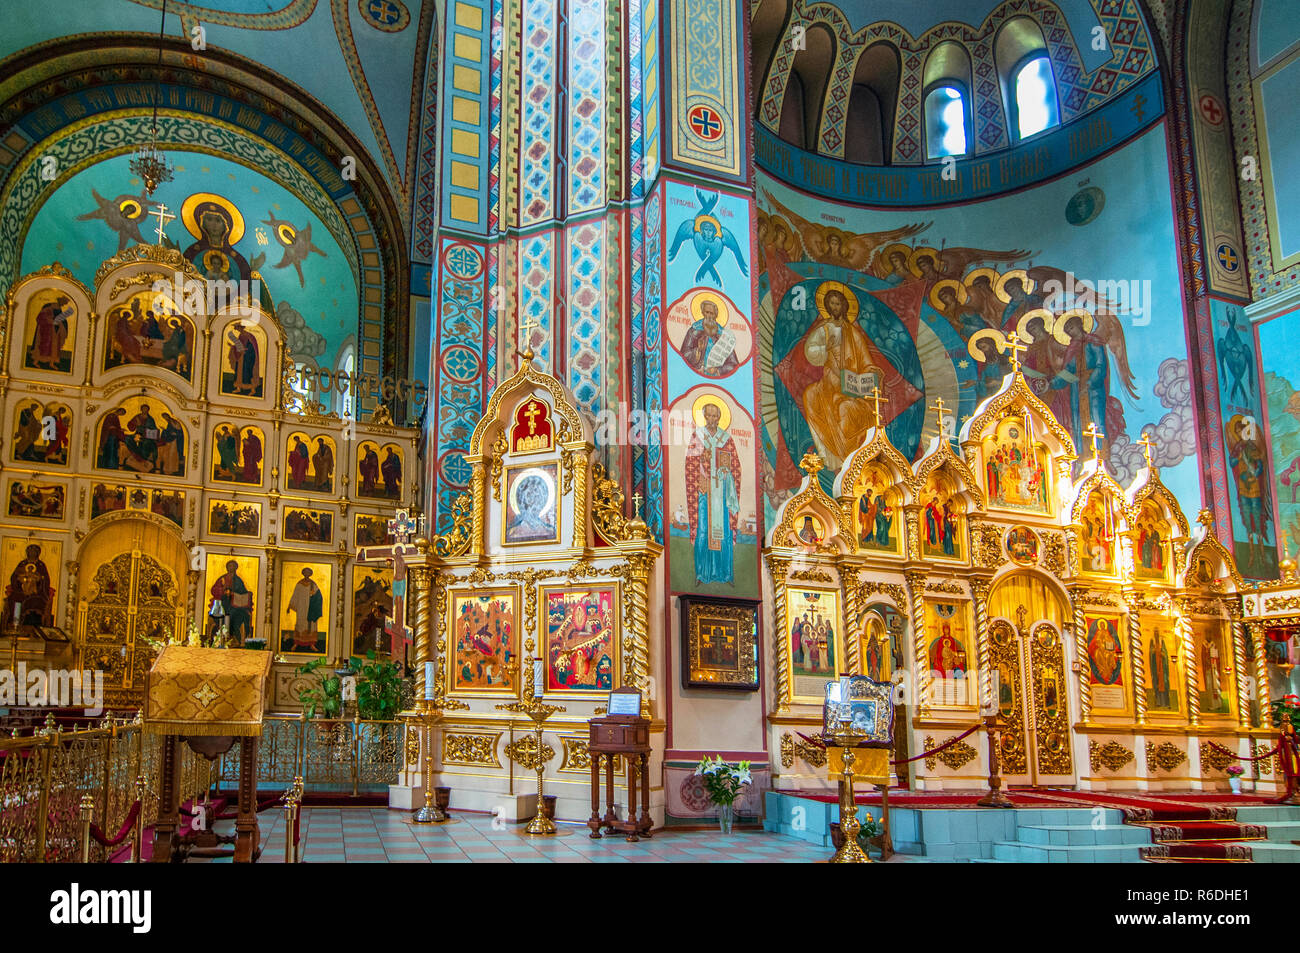 Interior Of Russian Orthodox Cathedral Of The Nativity Of Christ In Riga, Latvia Stock Photo